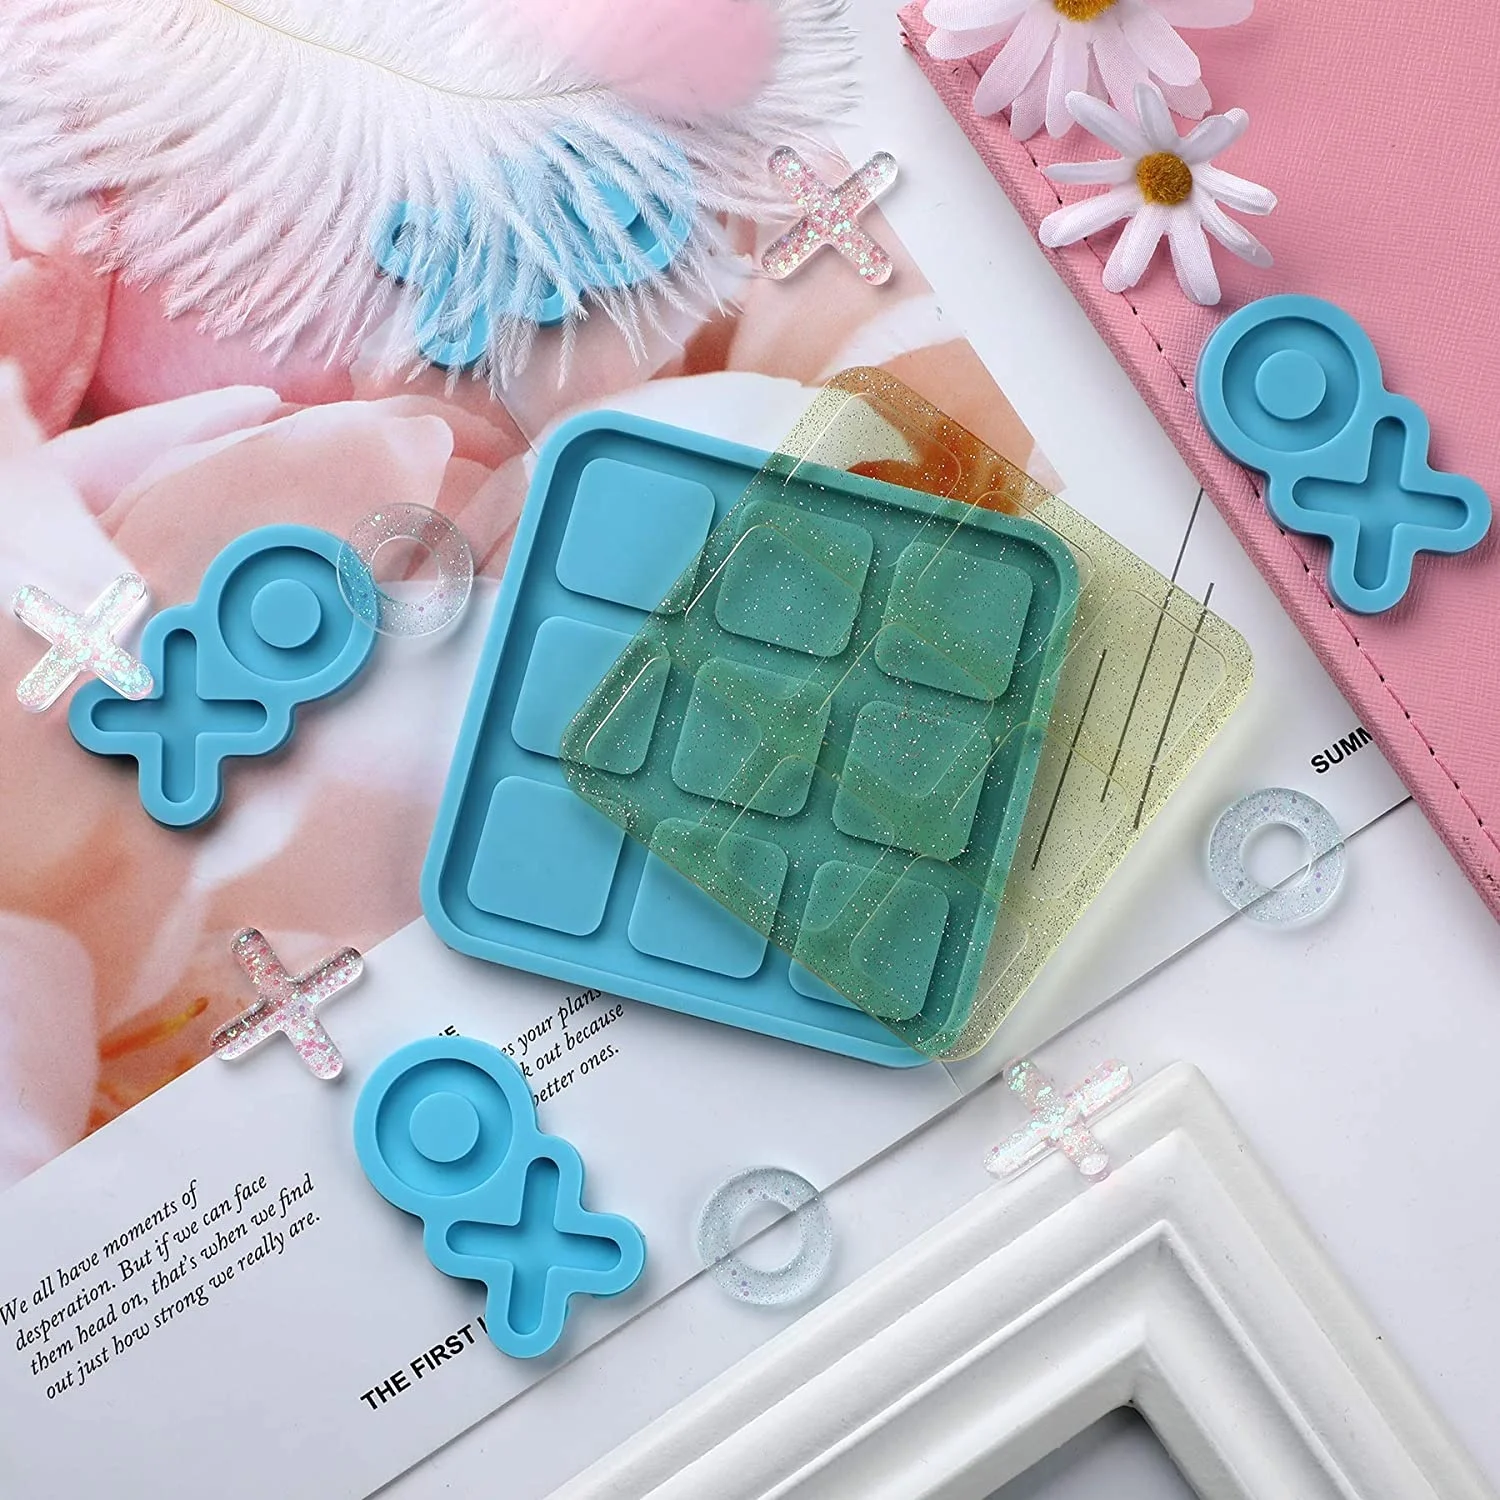 

Tic Tac Toe Resin Mold with 4 Chess Pieces Molds, X O Board Game Silicone Molds for Resin Casting,DIY Tabletop Board Game